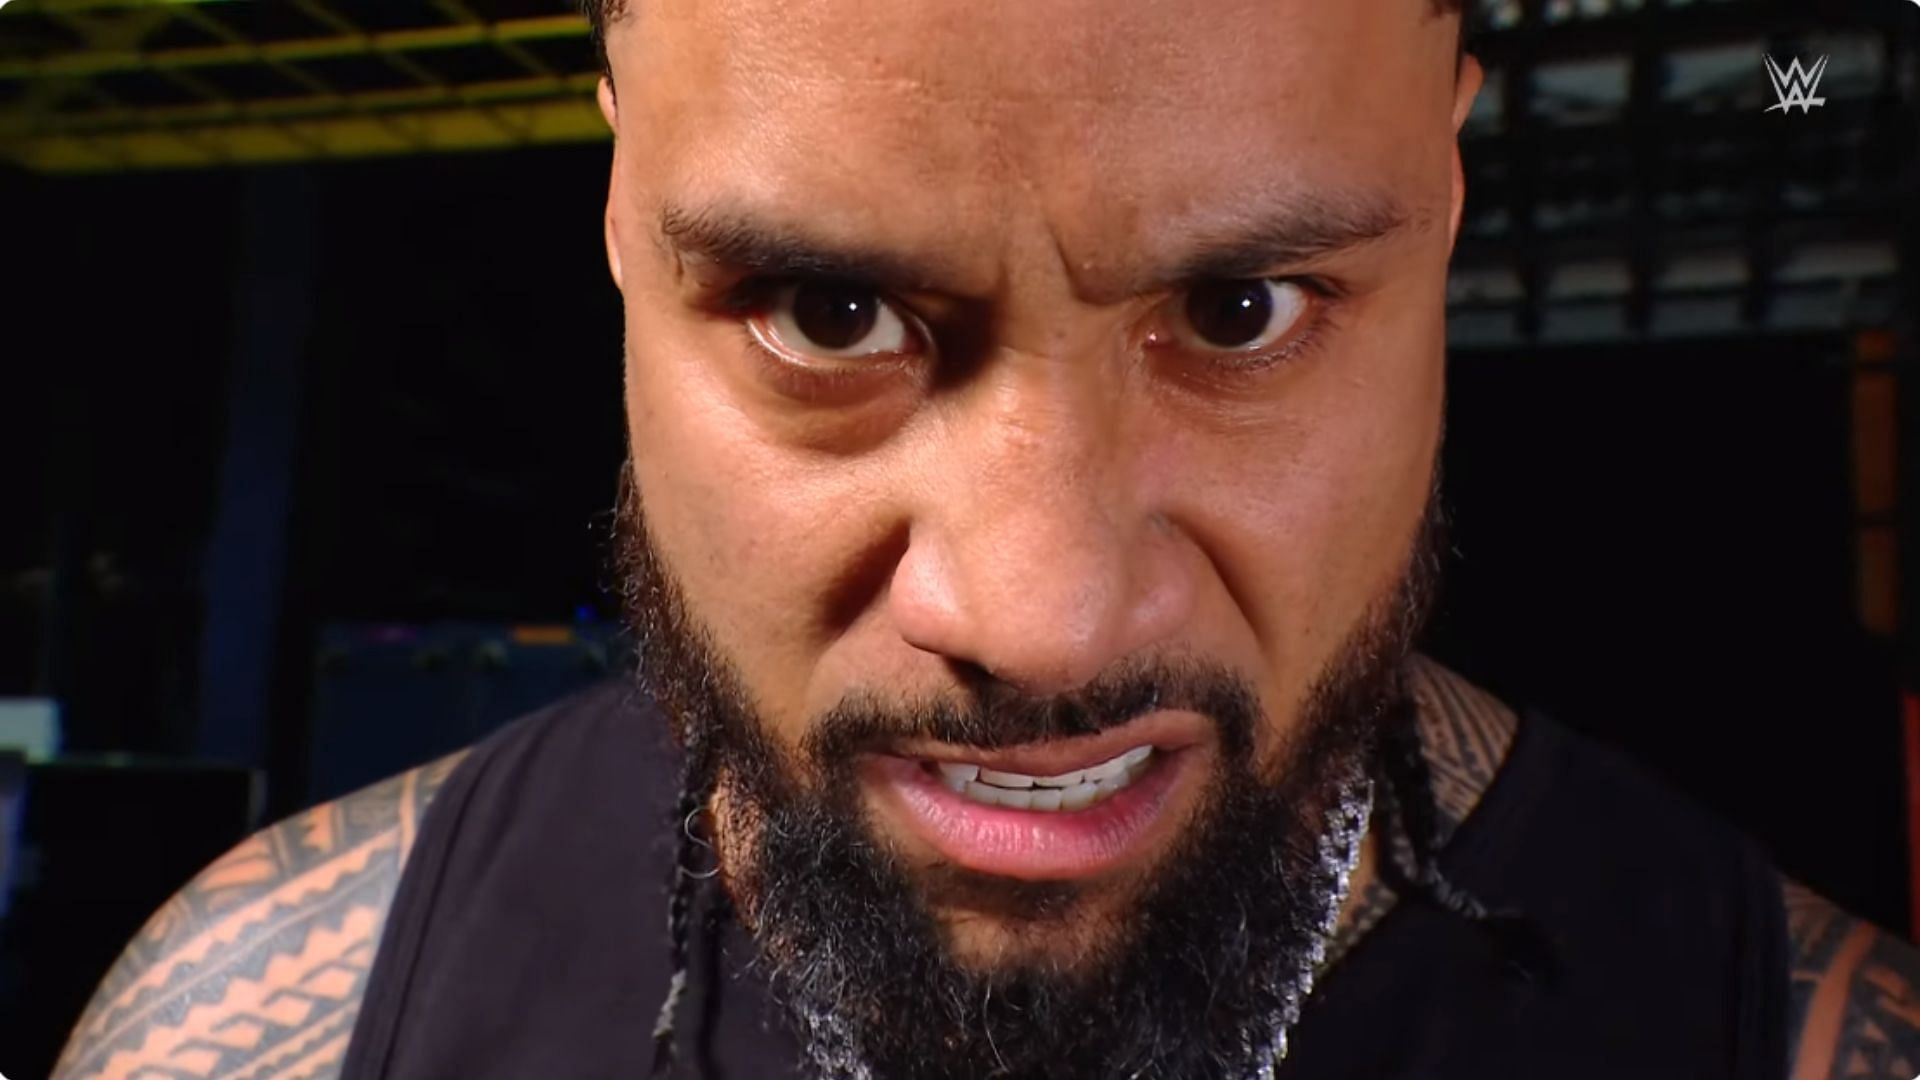 Jimmy Uso cutting a backstage promo on SmackDown.